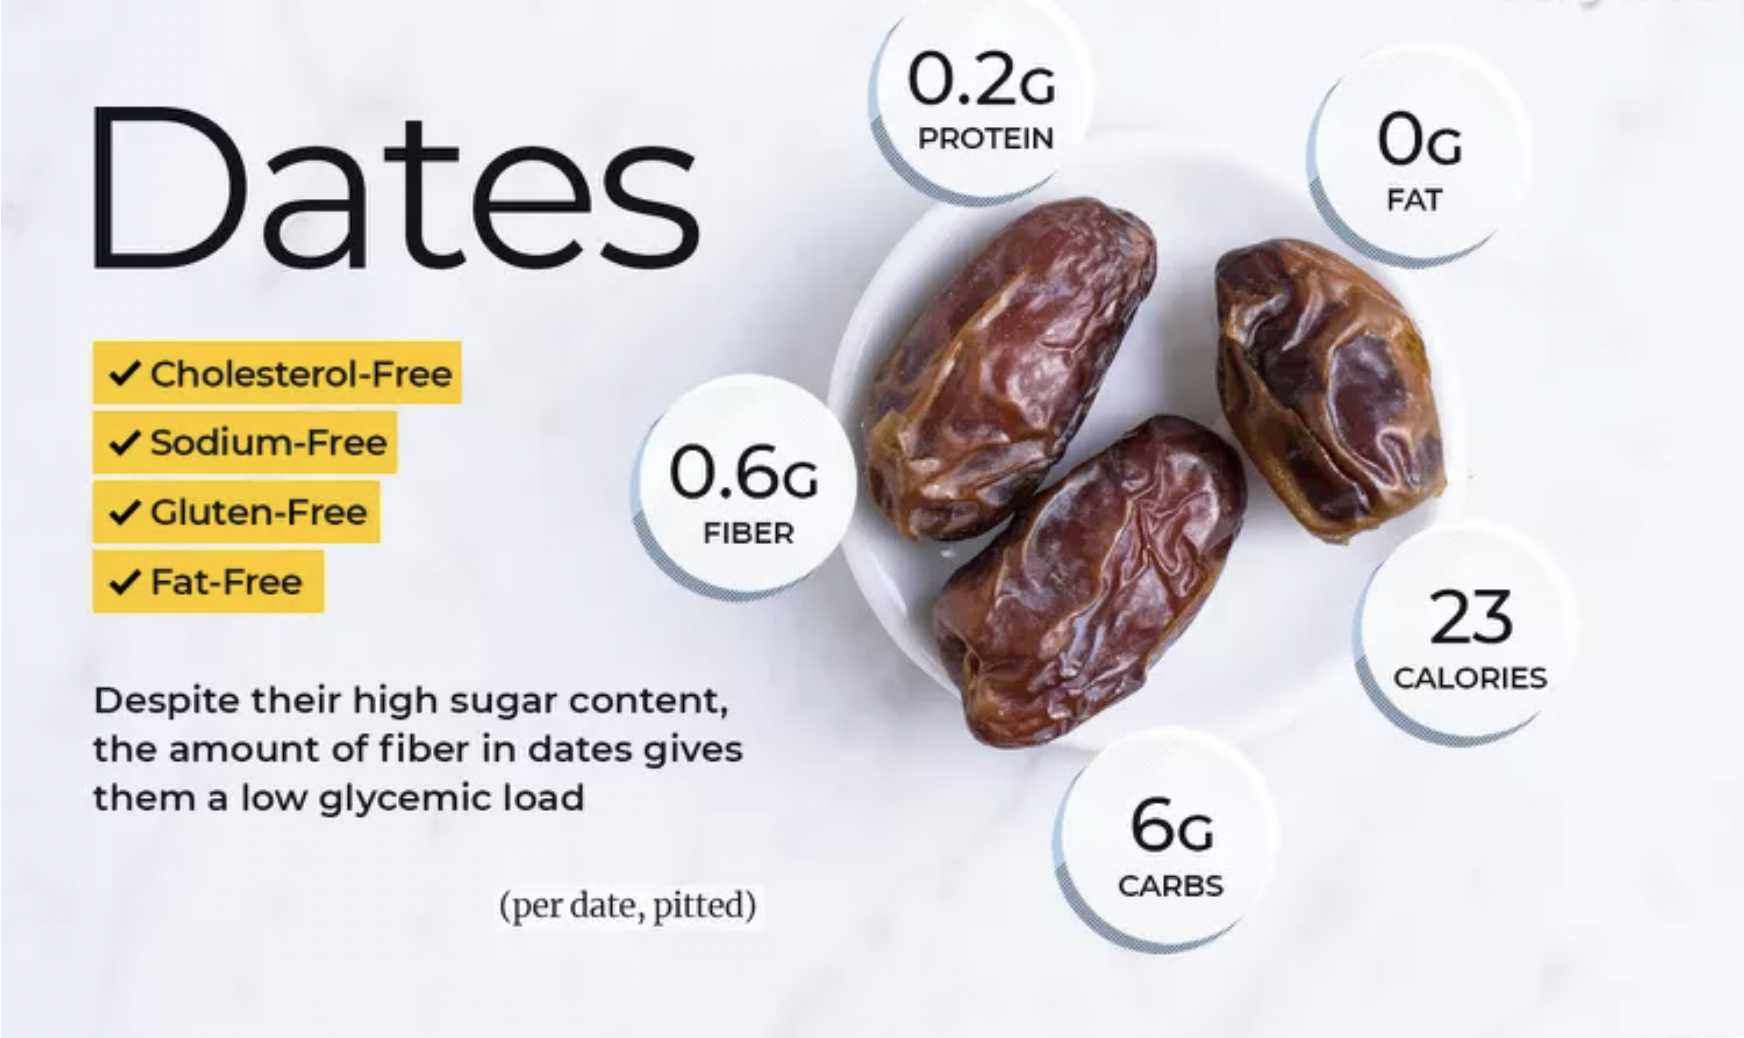 Dates Nutrition Facts Breakdown and Health Benefits